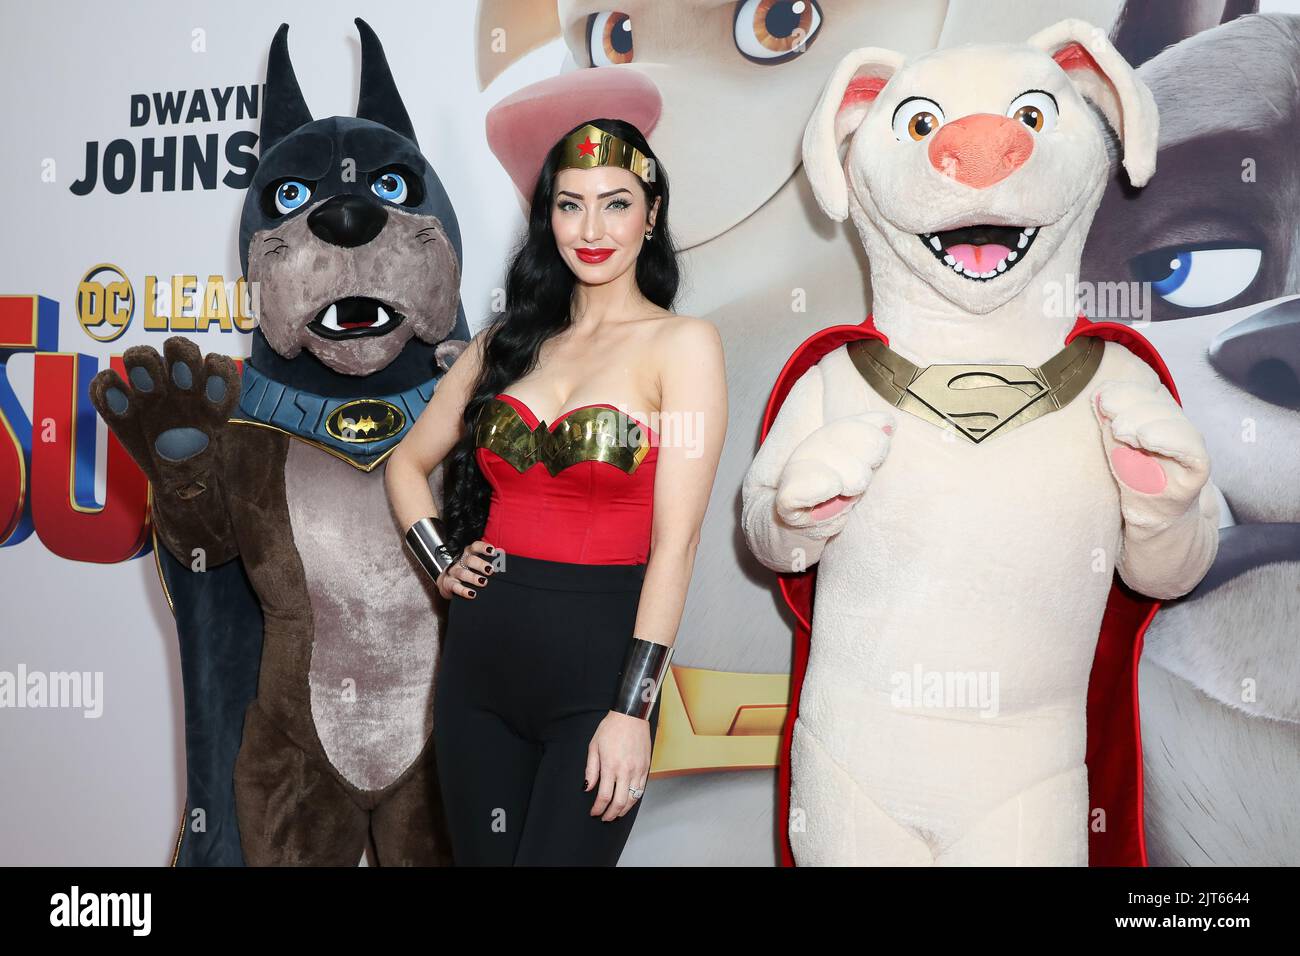 August 28, 2022: DANI DACIC attends the 'DC League of Super-Pets' Sydney Premiere at Events Cinemas Bondi Junction on August 28, 2022 in Sydney, NSW Australia  (Credit Image: © Christopher Khoury/Australian Press Agency via ZUMA  Wire) Stock Photo